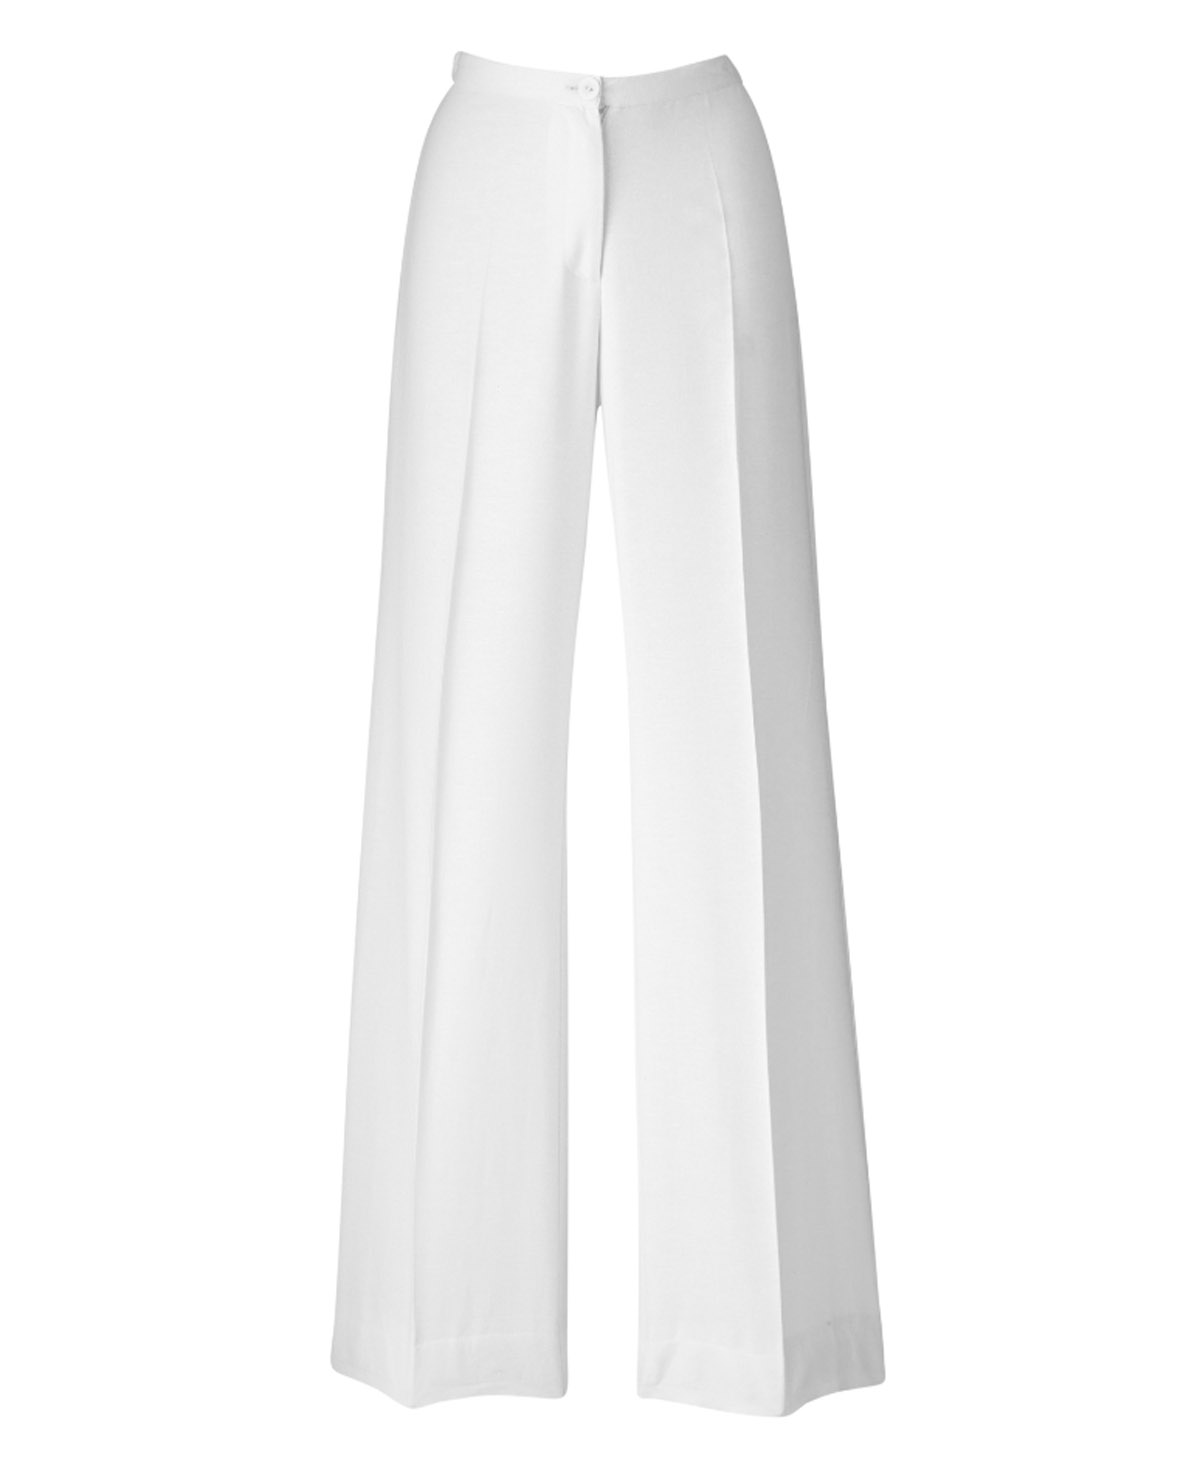 Joanna Hope - - Joanna Hope WHITE Linen Blend Trousers - Plus Size 12 to 24